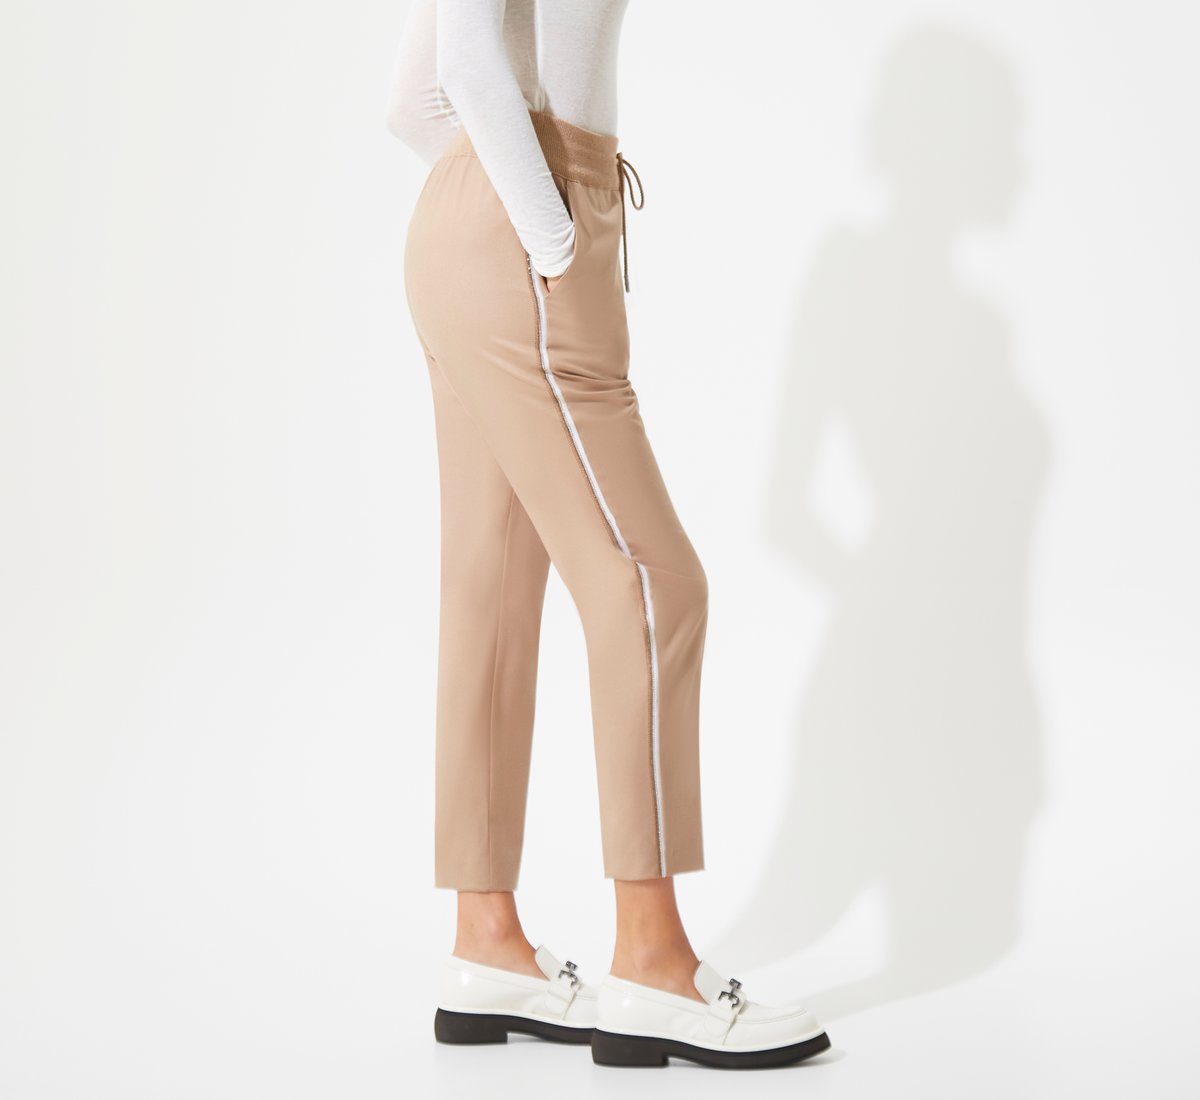 Powder pink elasticated trousers